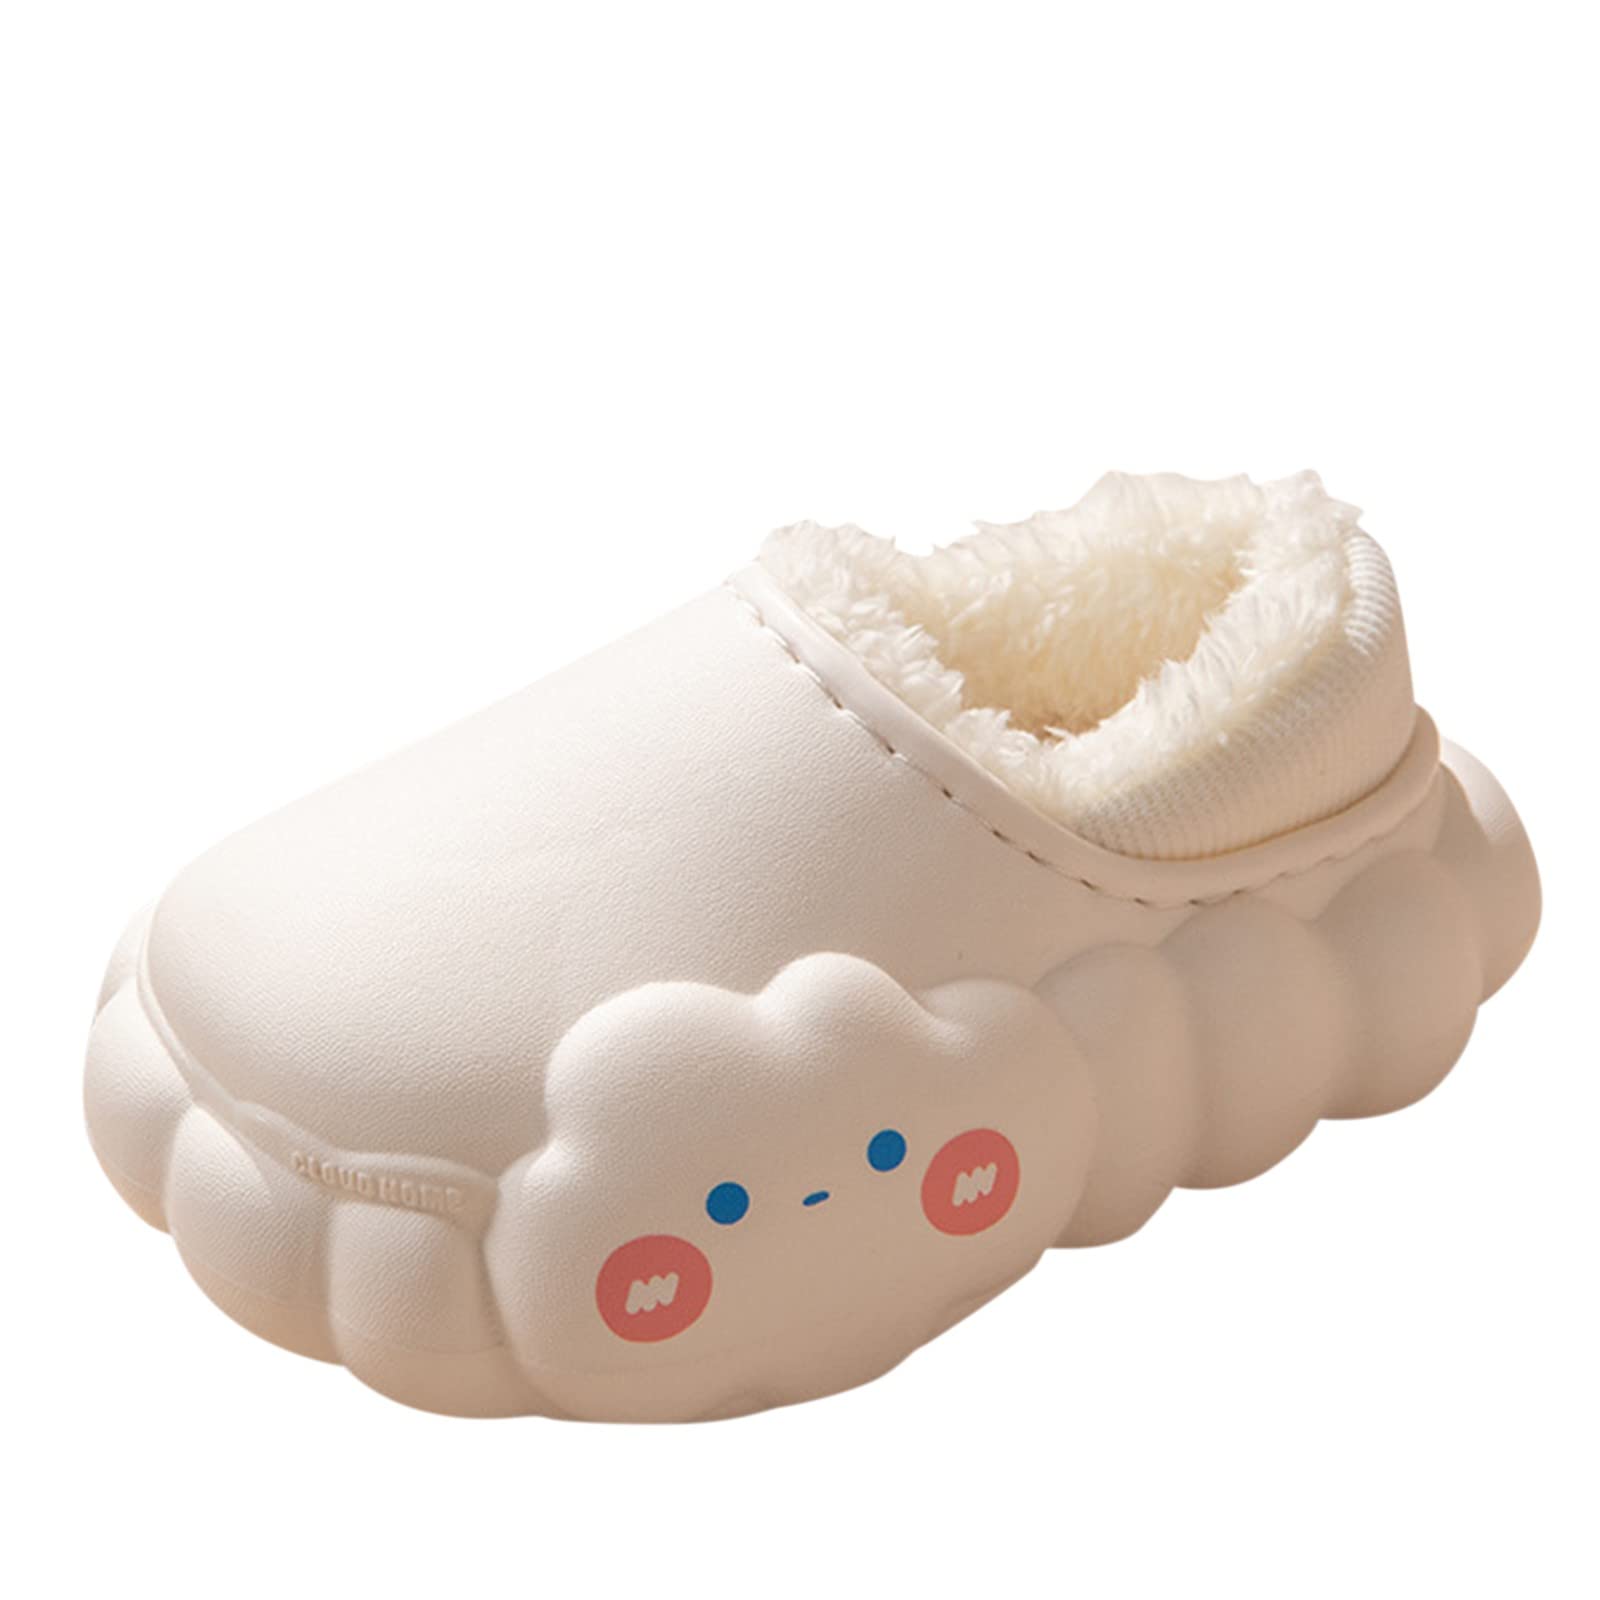 Big Girls Fuzzy Slippers Autumn and Winter Girls and Boys Slippers Flat Bottom Non Sandals for Girls Size 4